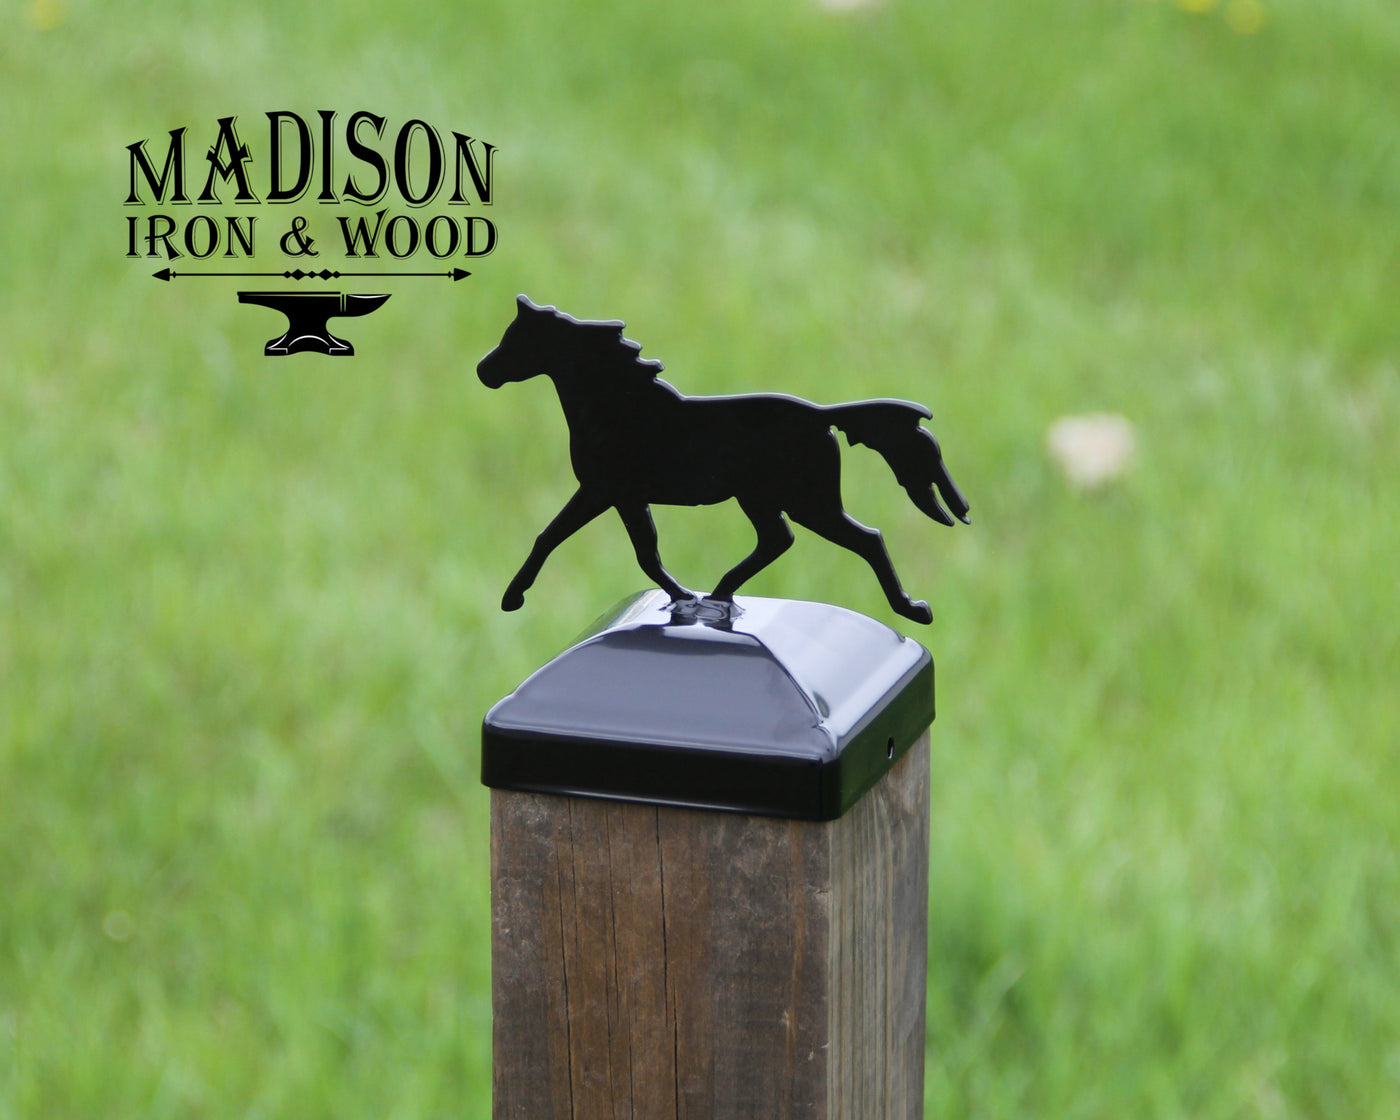 6x6 Trotting Horse Post Cap - Madison Iron and Wood - Post Cap - metal outdoor decor - Steel deocrations - american made products - veteran owned business products - fencing decorations - fencing supplies - custom wall decorations - personalized wall signs - steel - decorative post caps - steel post caps - metal post caps - brackets - structural brackets - home improvement - easter - easter decorations - easter gift - easter yard decor